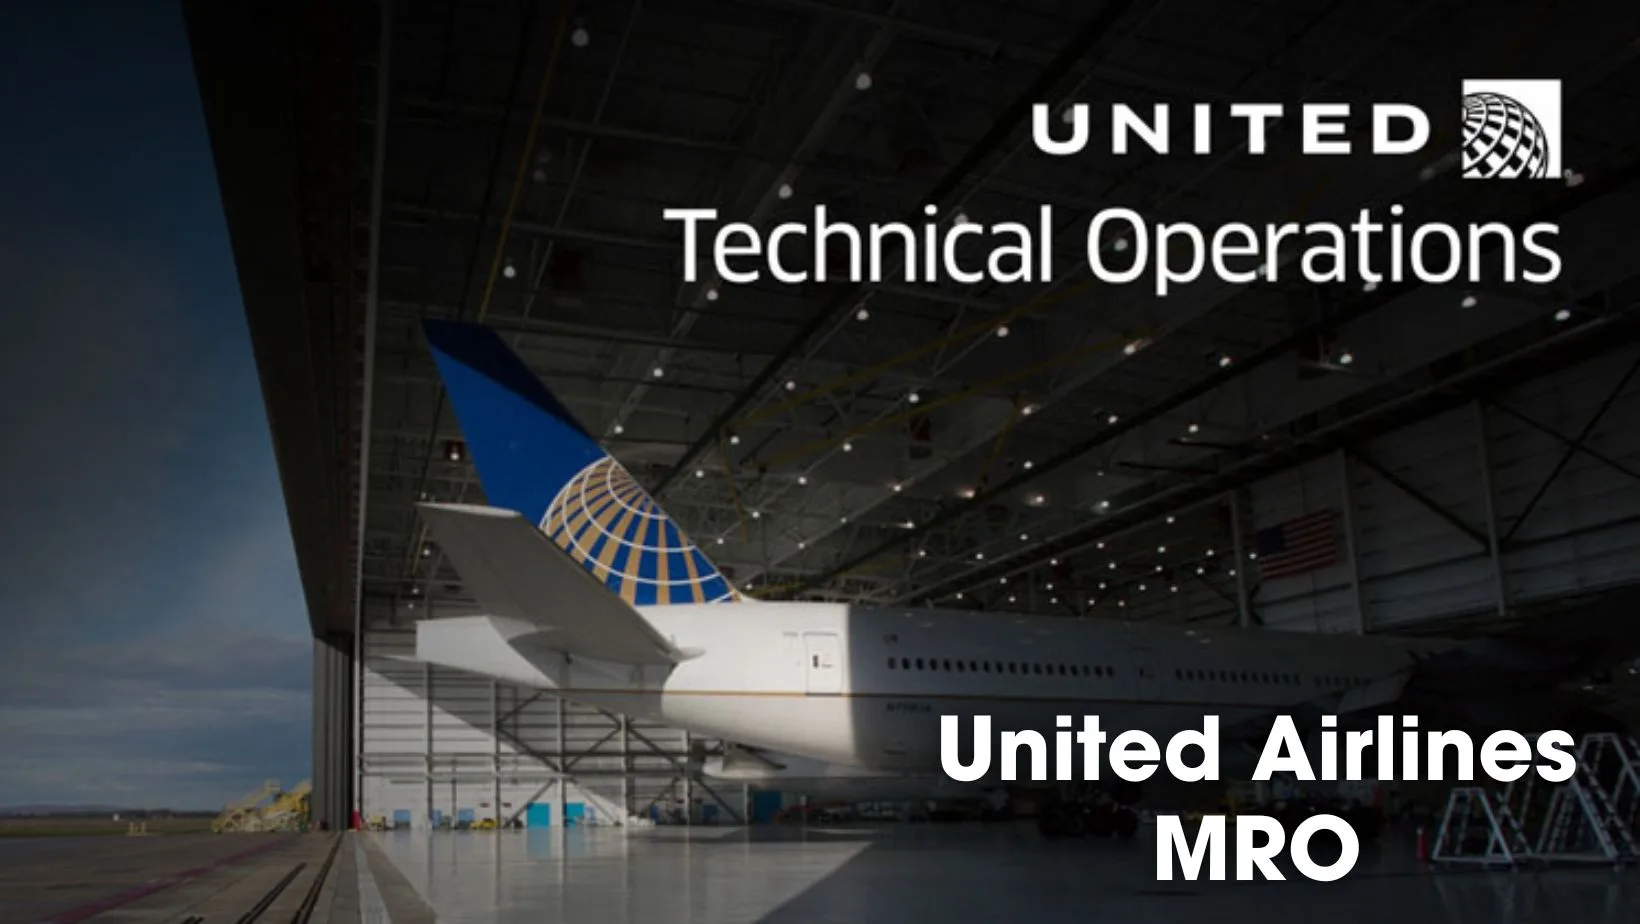 United Airlines MRO